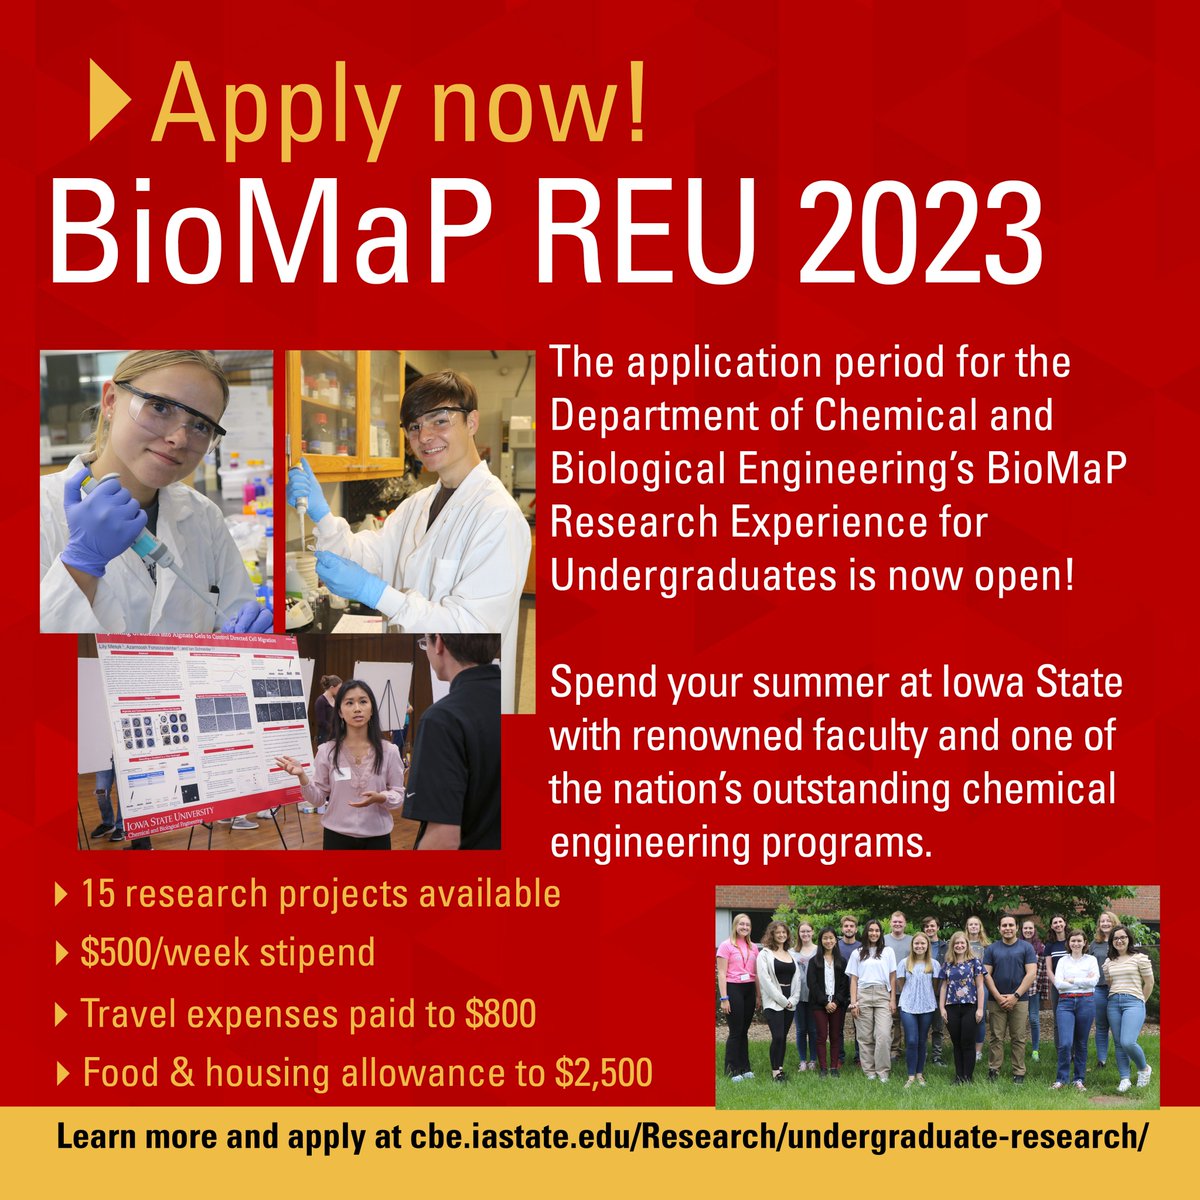 Application window for CBE's BioMaP REU 2023 program is now open through February 15! Don't wait! Learn more and apply: cbe.iastate.edu/research/under…